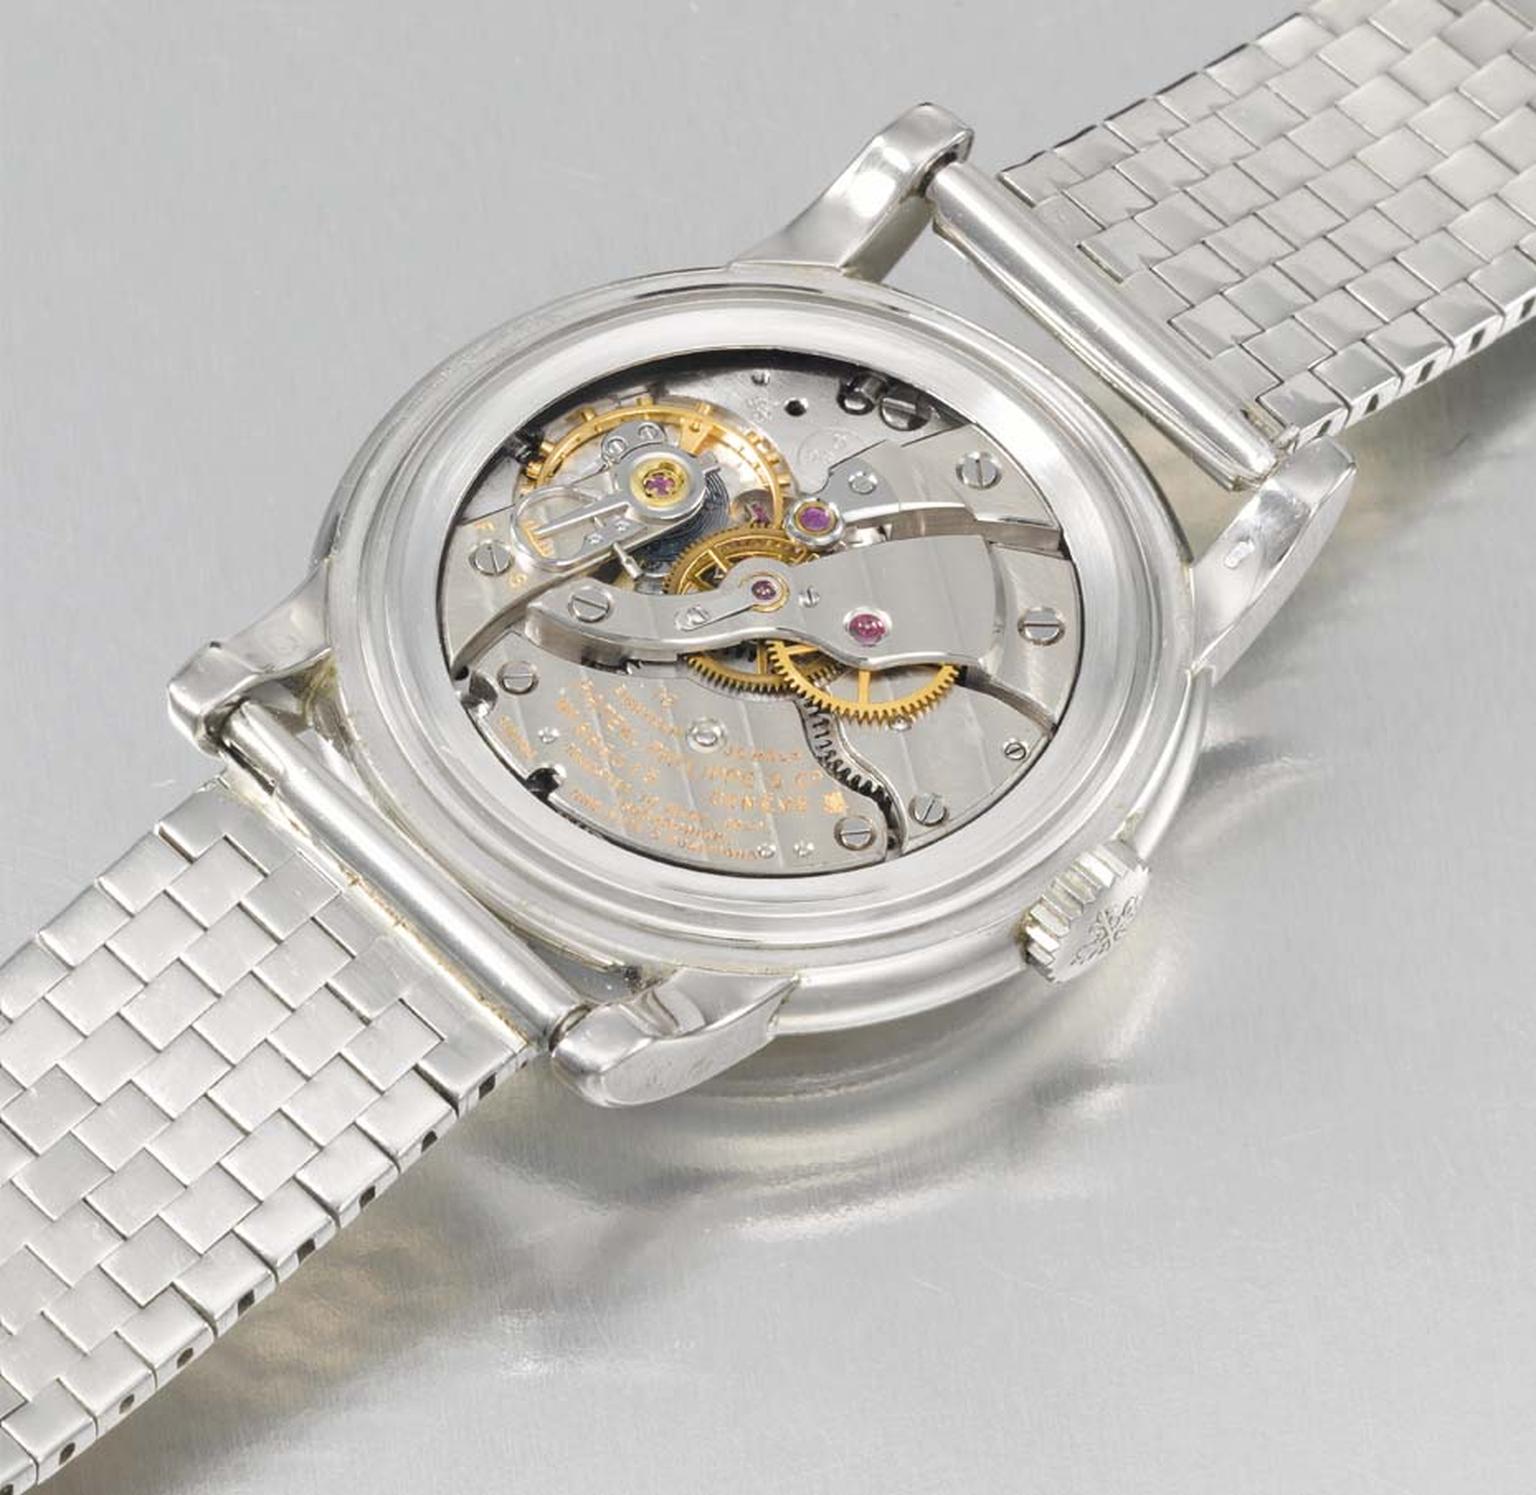 The Patek Philippe Reference 2497 watch incorporates a perpetual calendar and Moon phase indicator and has a pre-sale estimate of US$1.1 million-2.1 million.